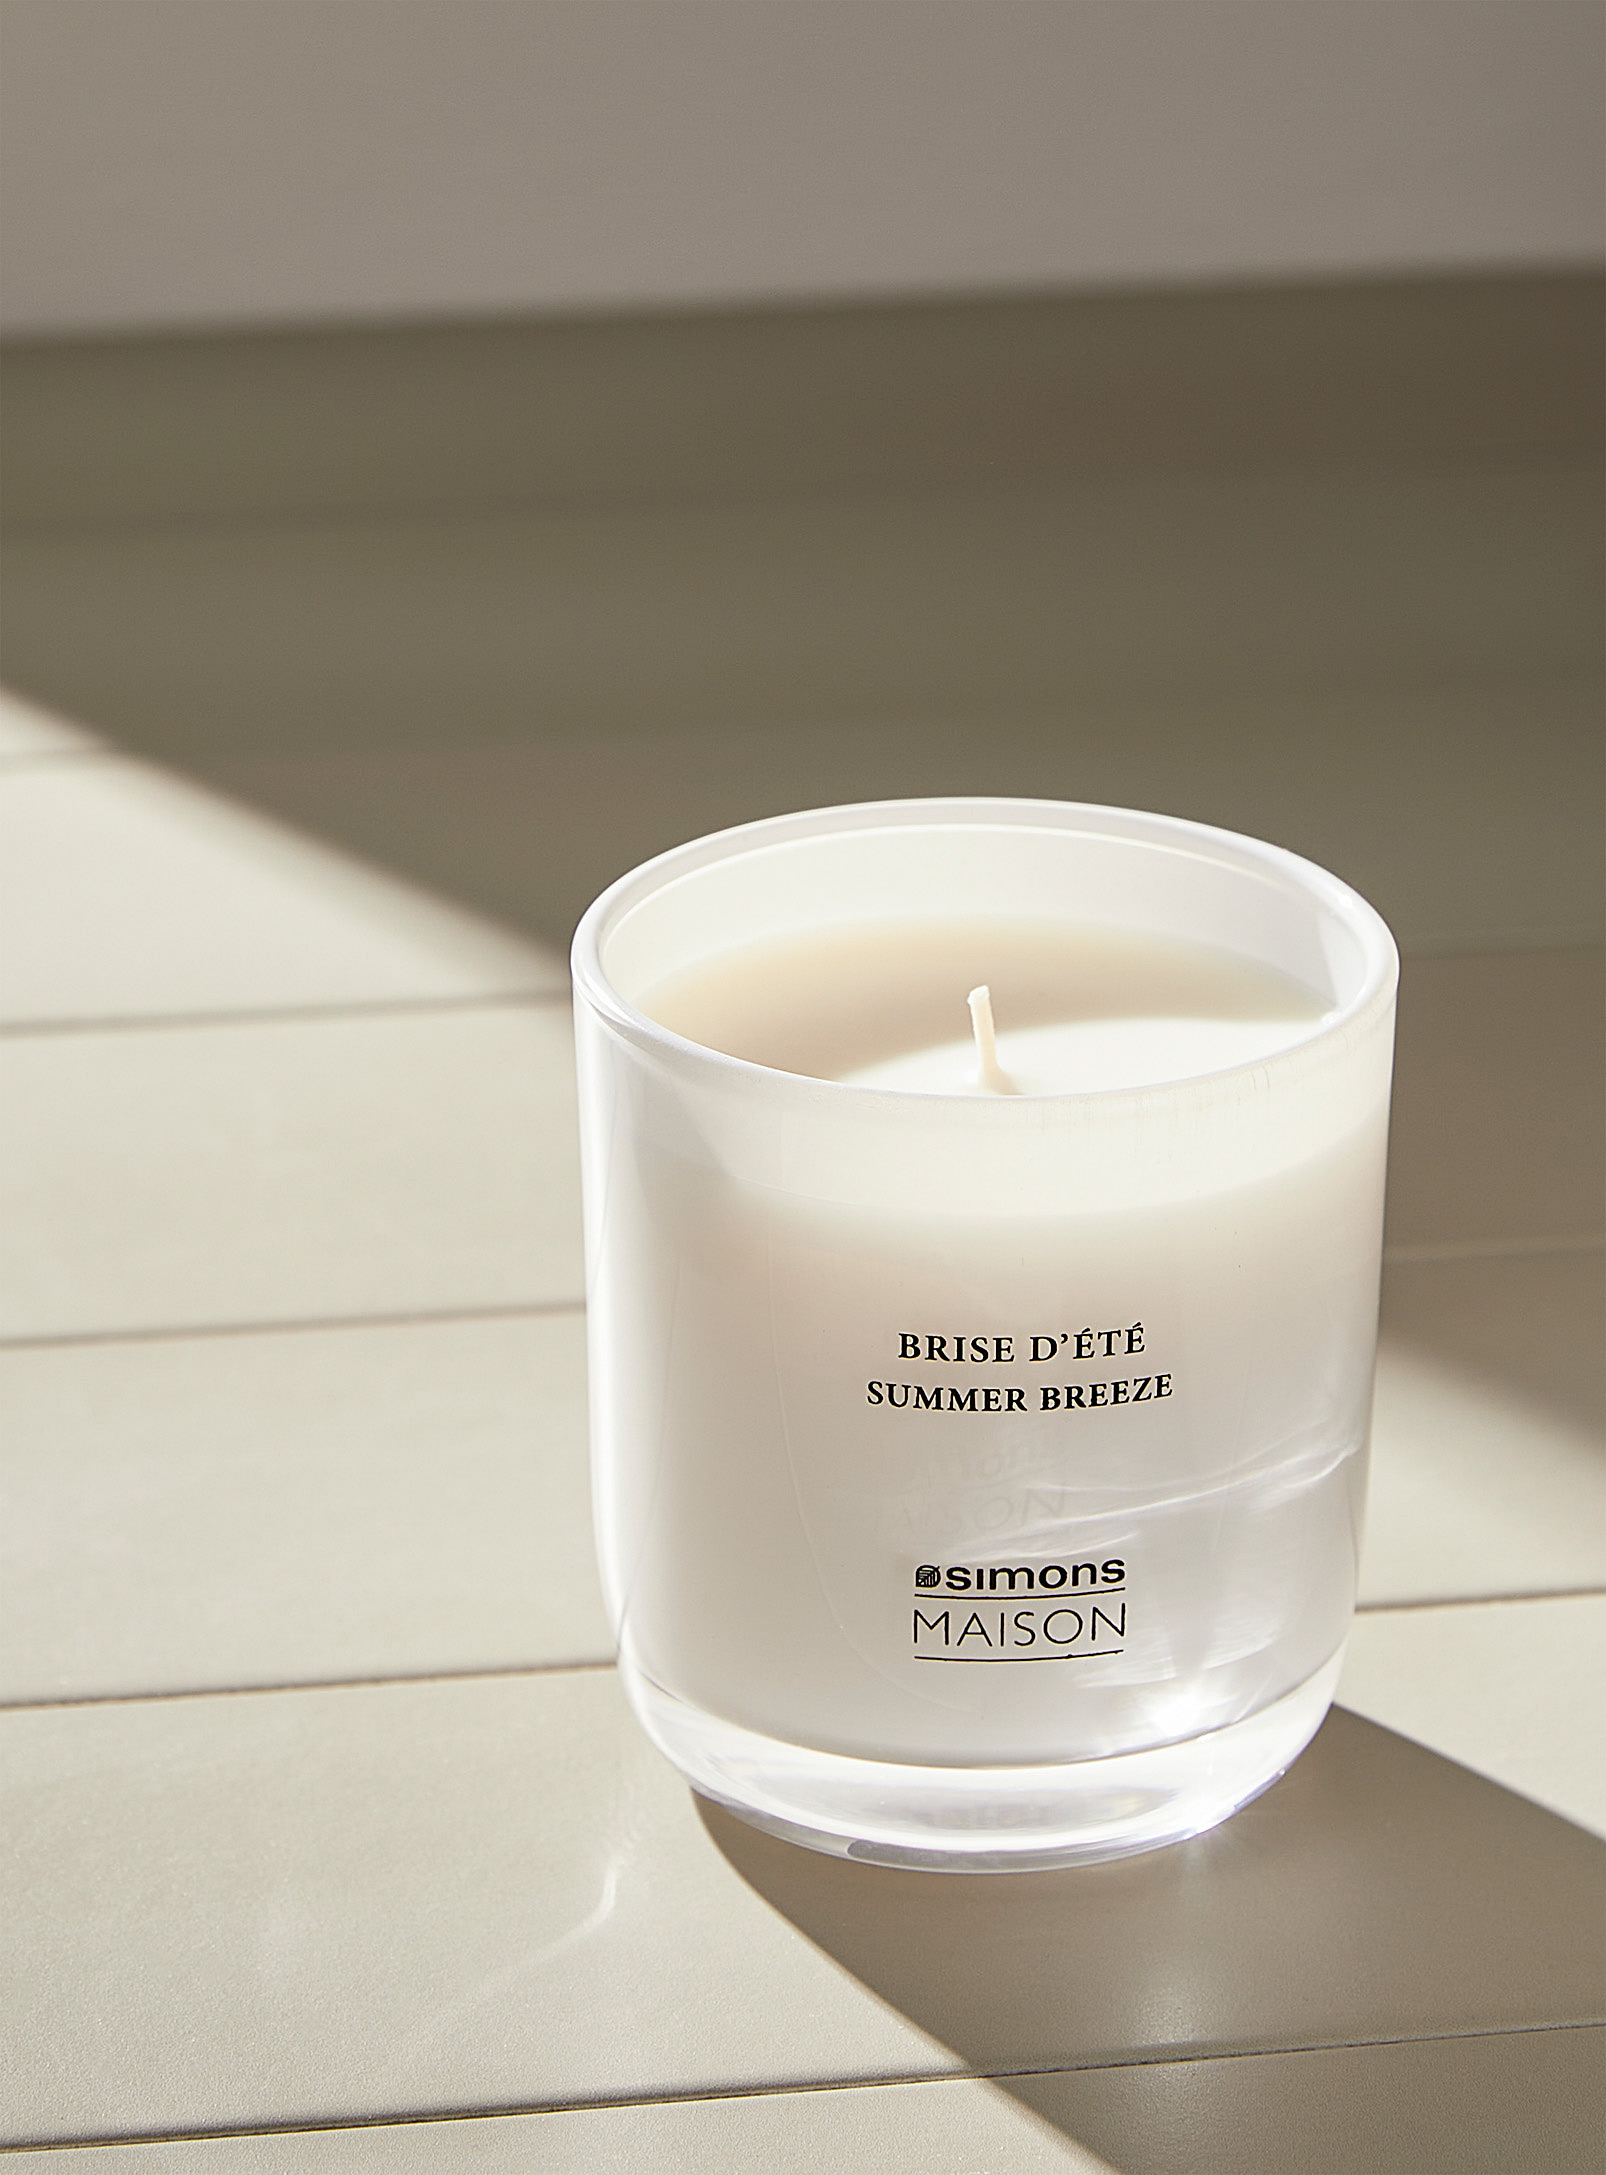 Simons Maison Summer Breeze Scented Candle In White